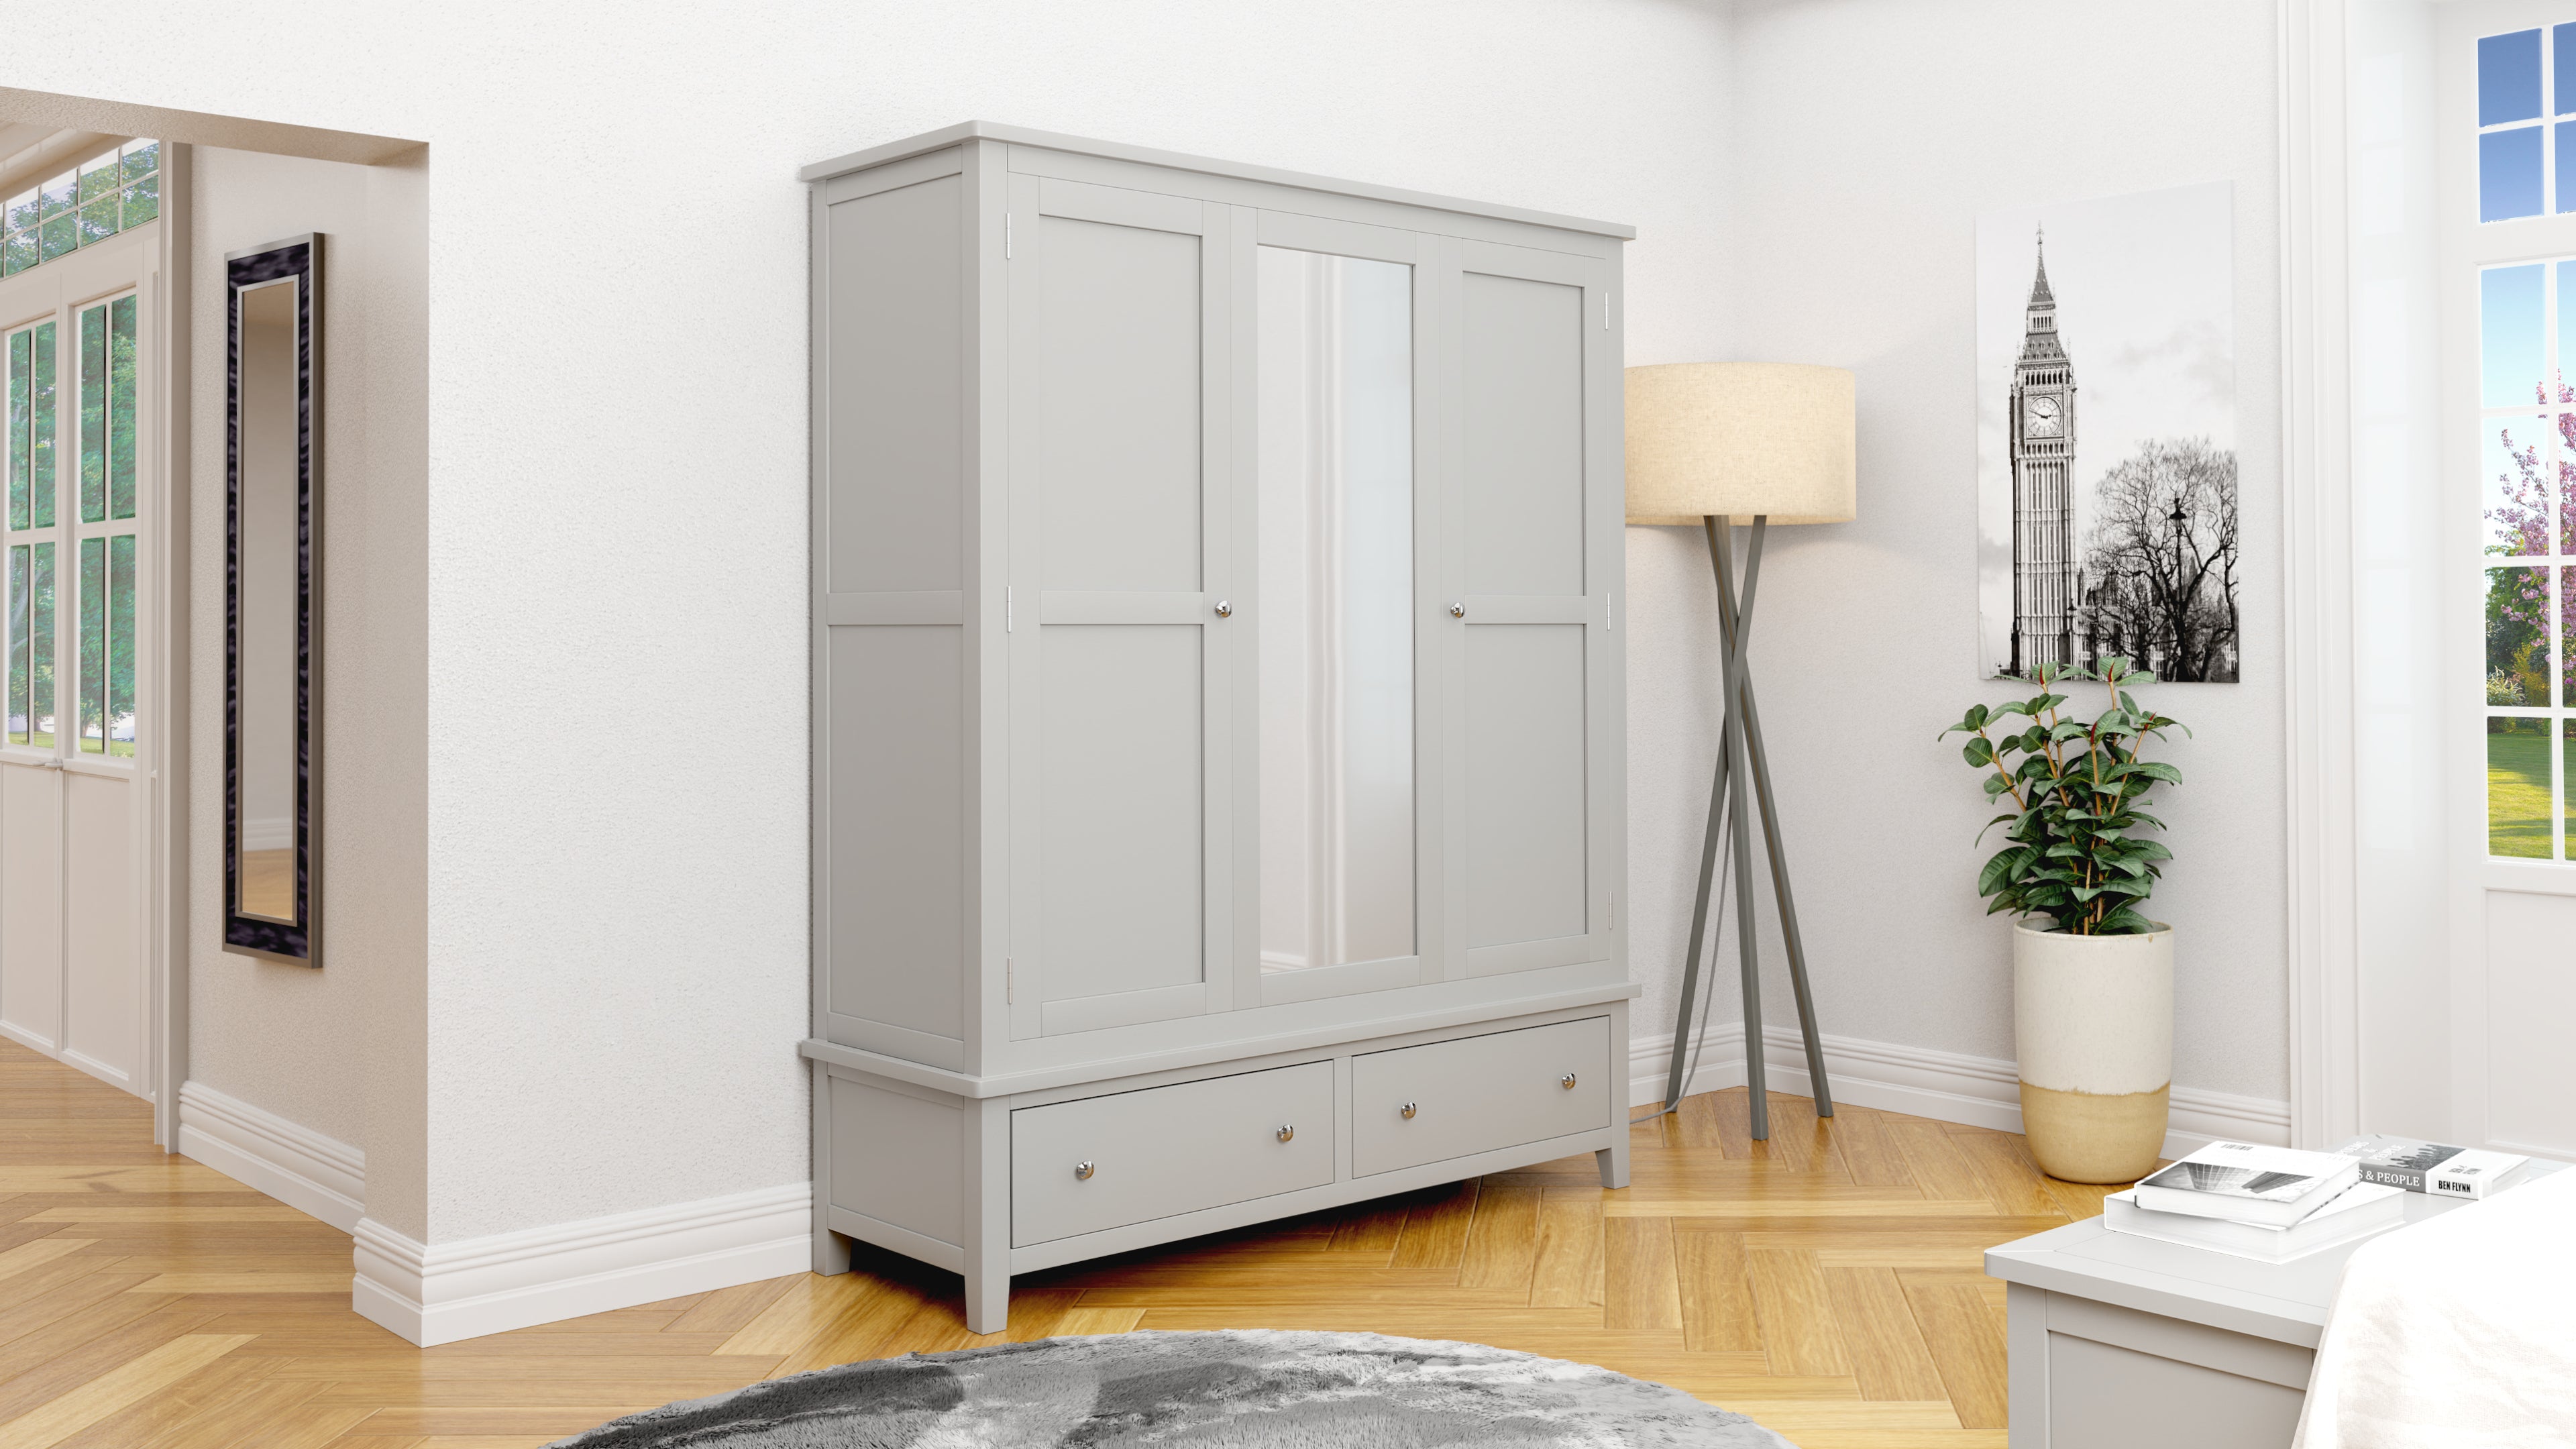 Oxford Nightstand with Drawer Grey